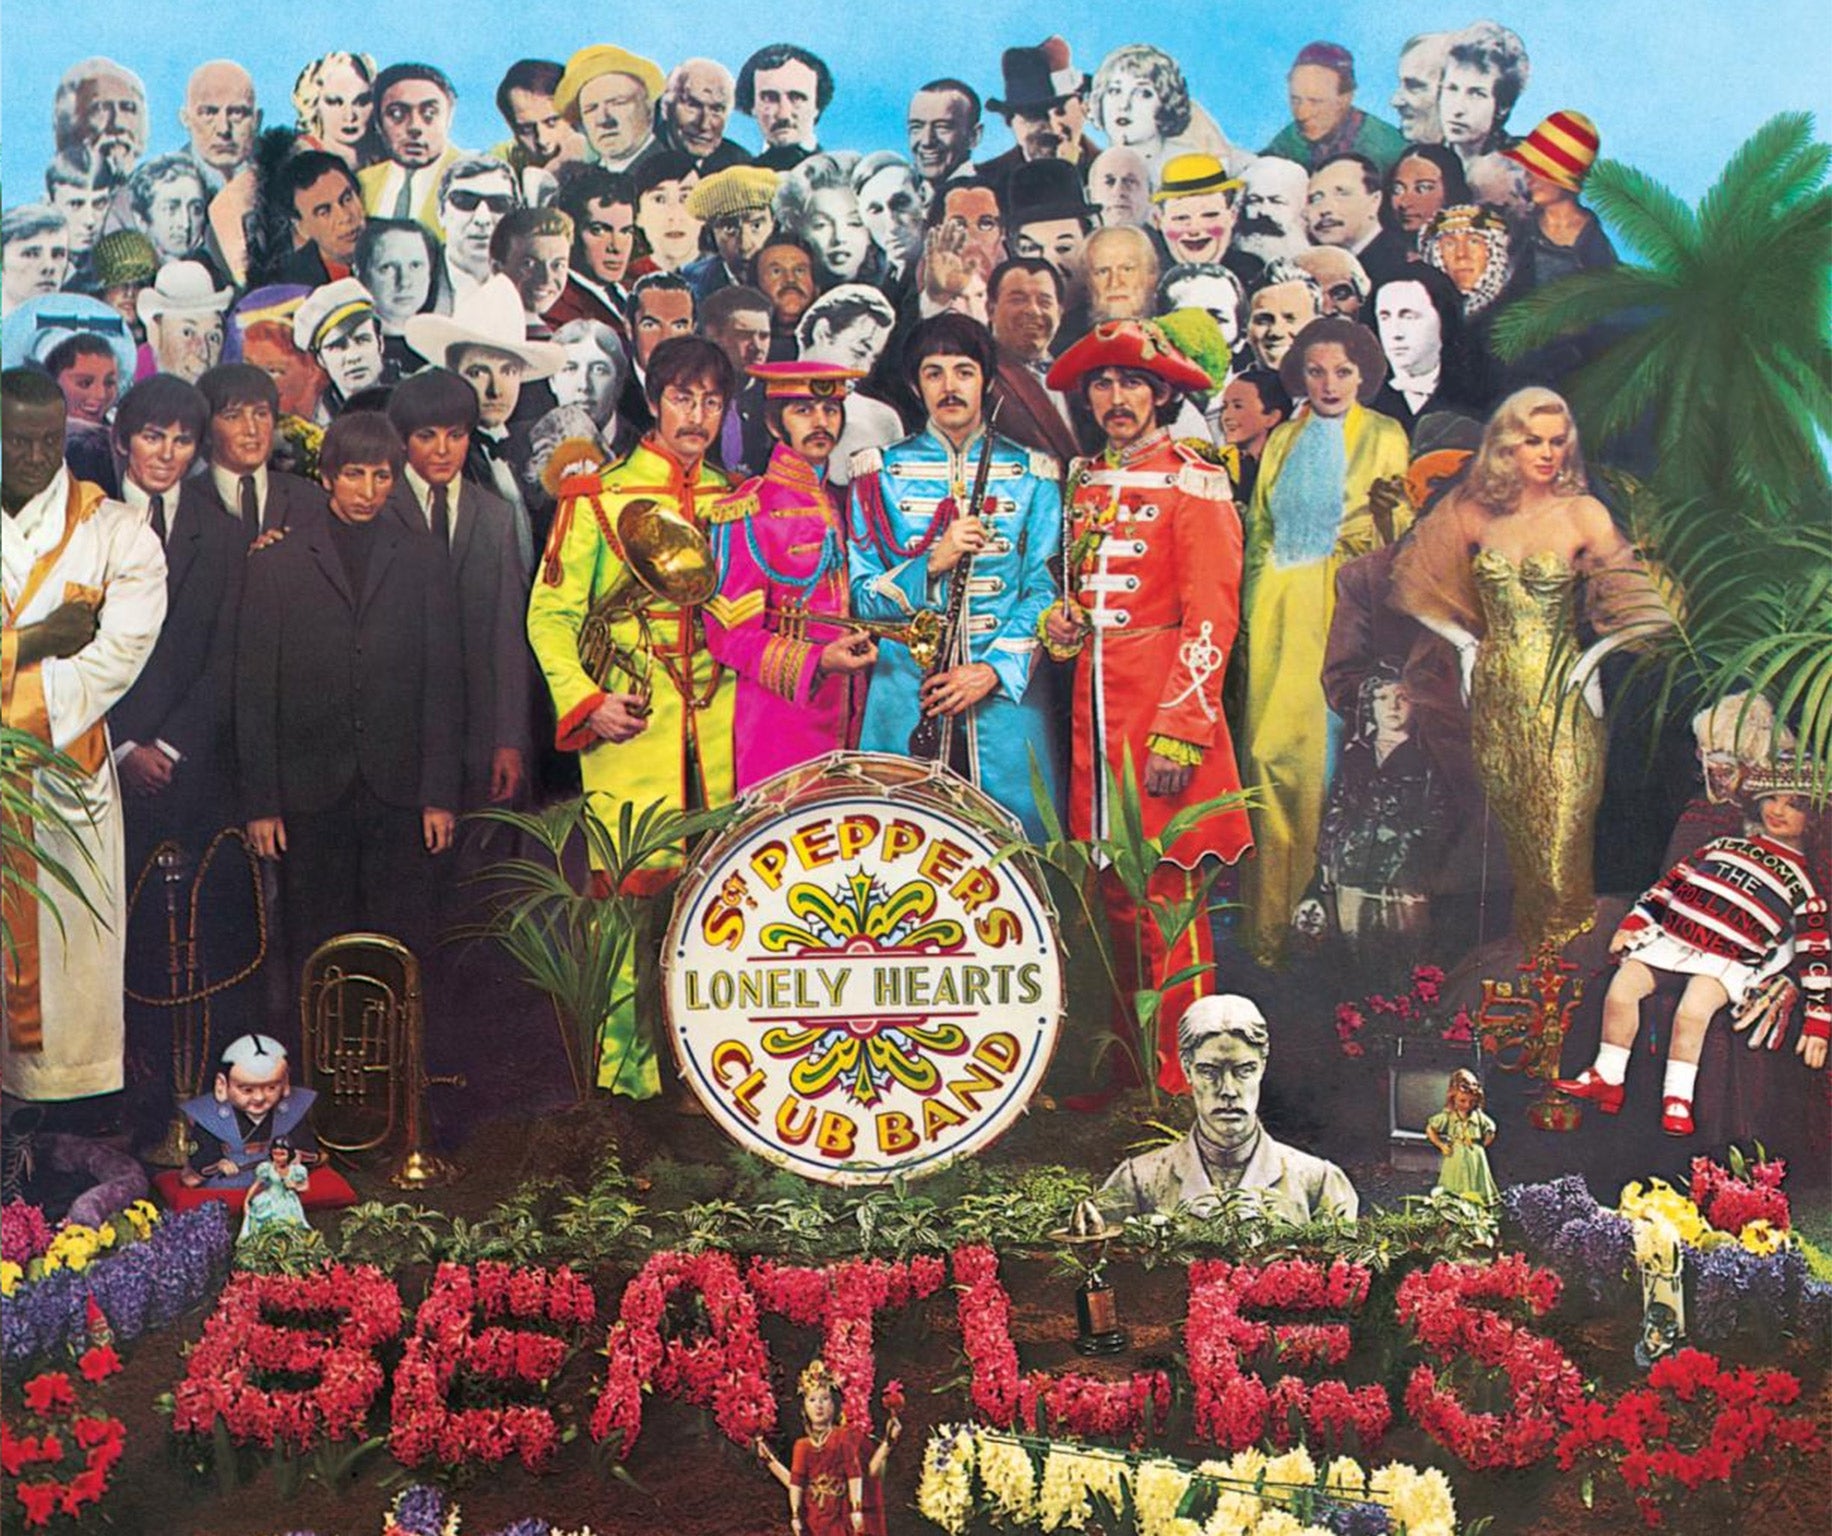 Groundbreaking: Sgt Pepper’s Lonely Hearts Club Band